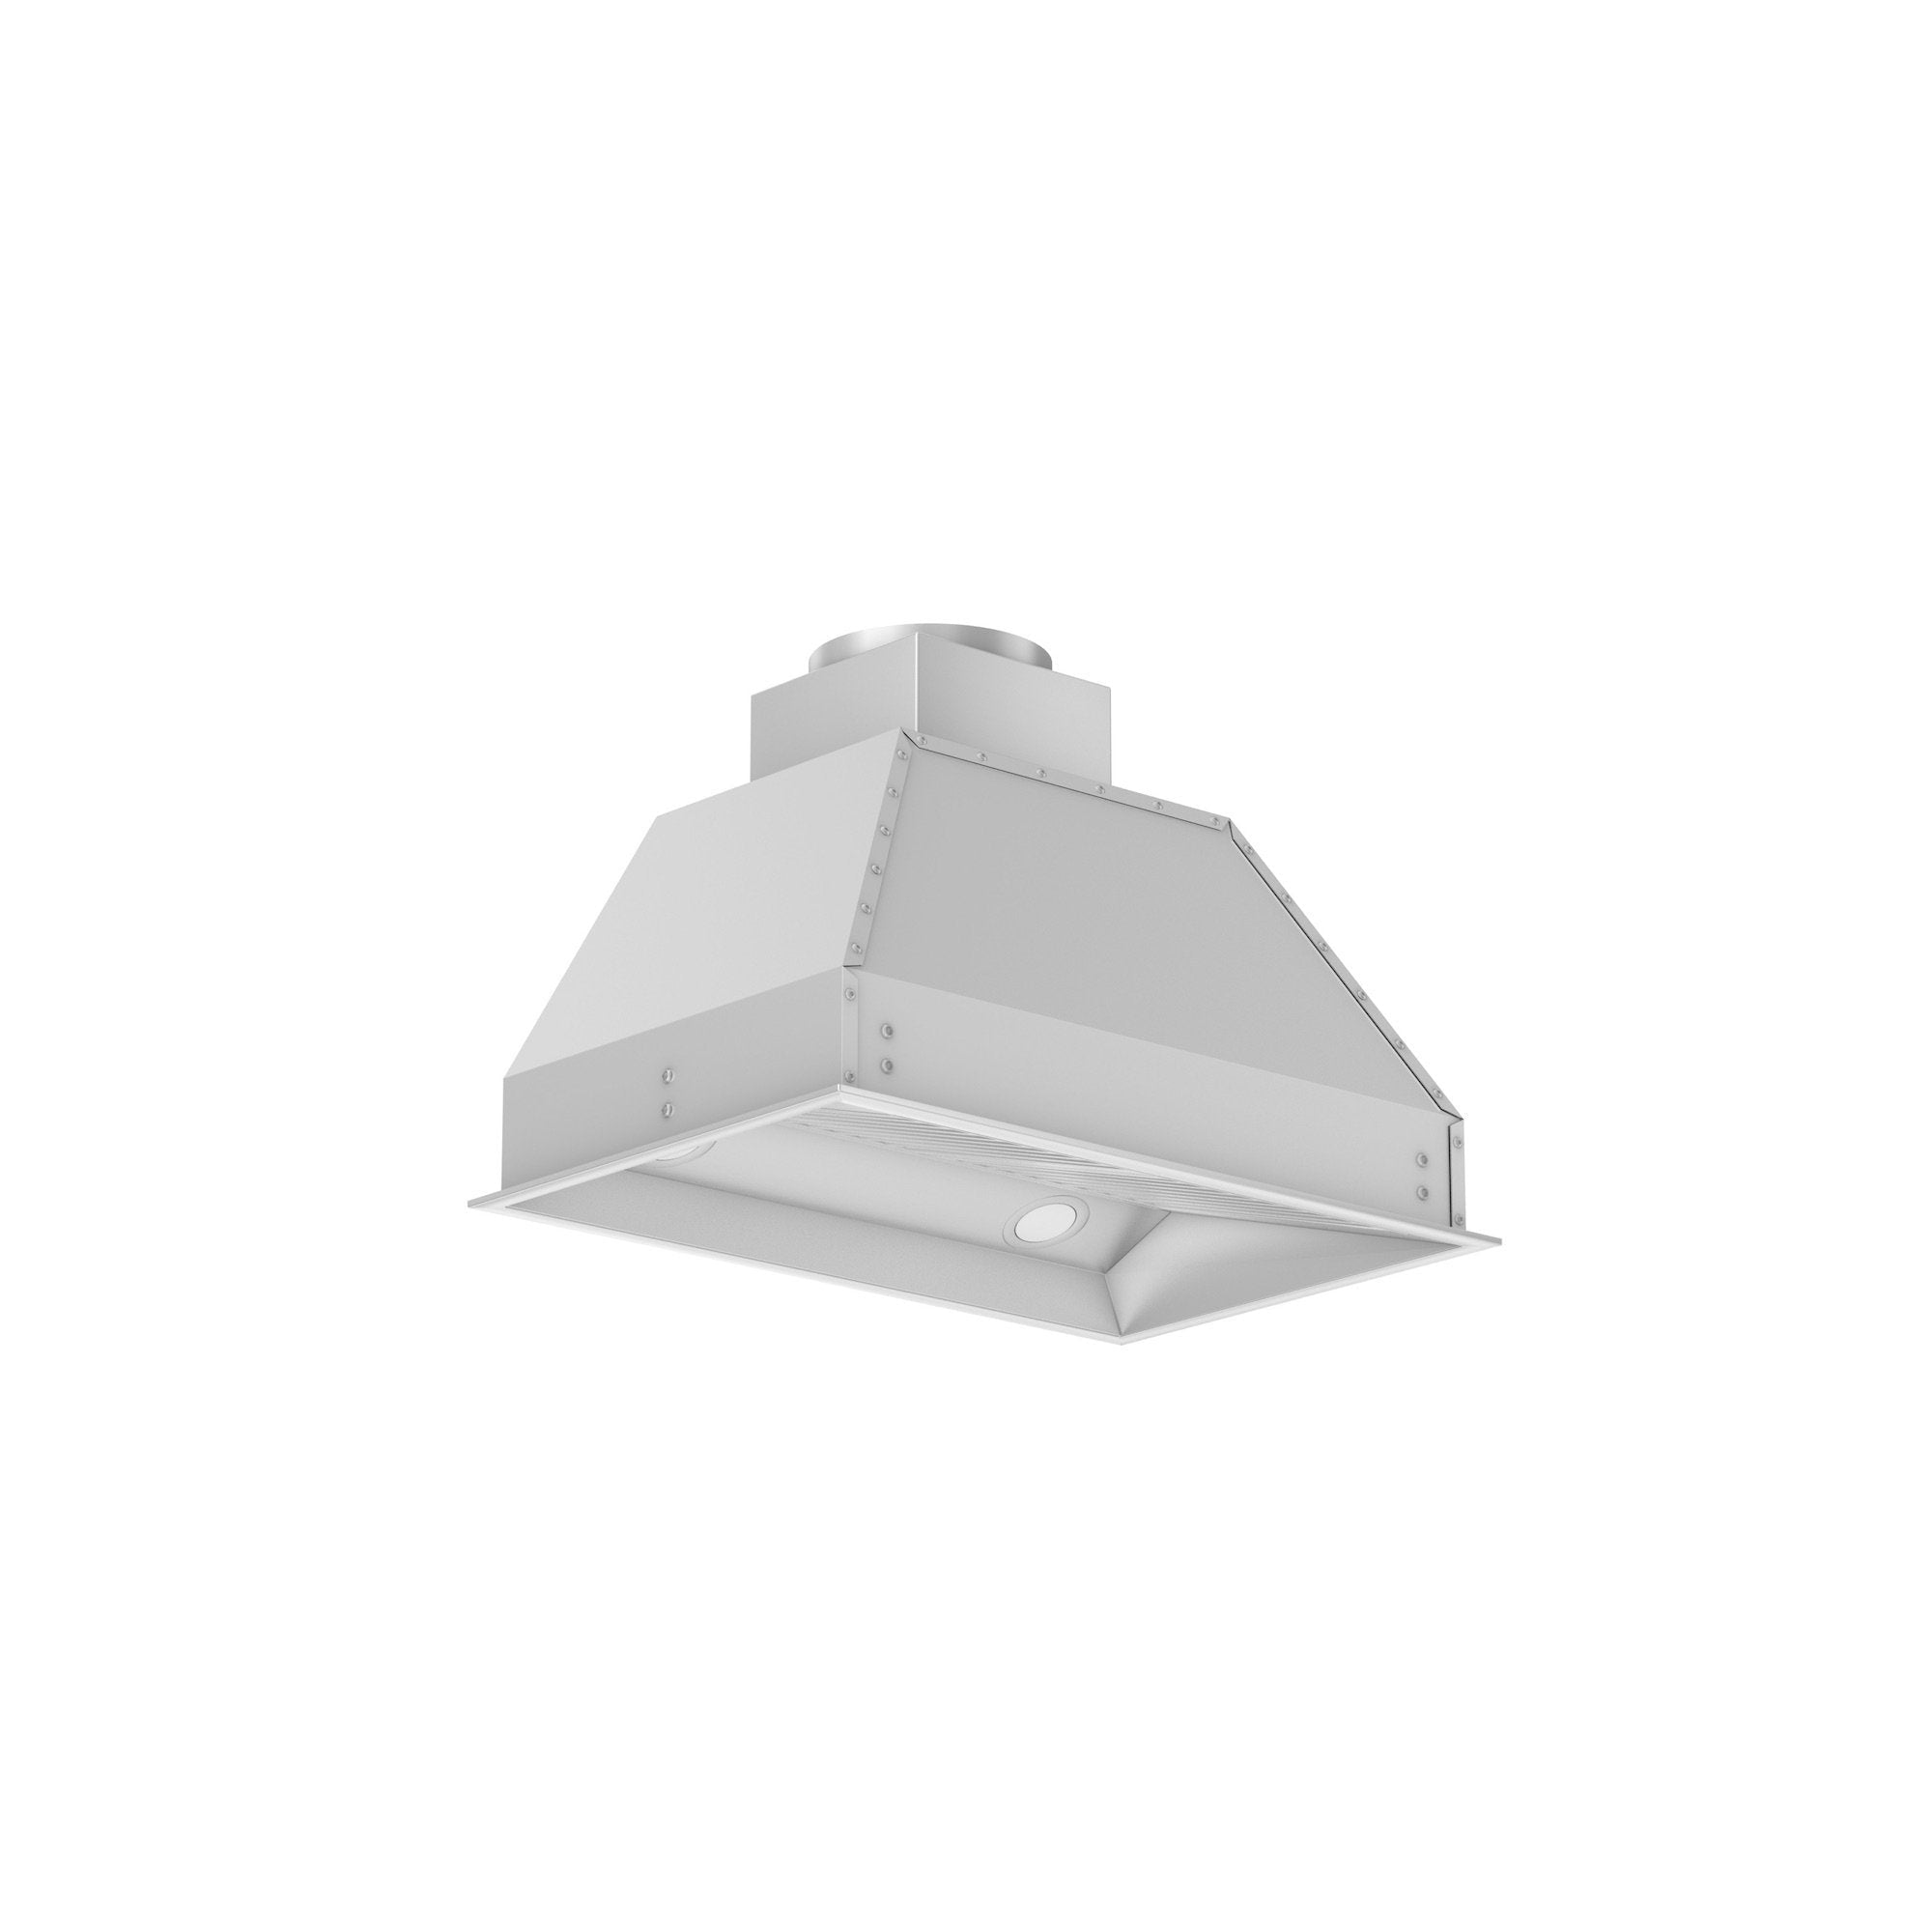 ZLINE Ducted Remote Blower 400 CFM Range Hood Insert in Stainless Steel (698-RS-28) - New Star Living